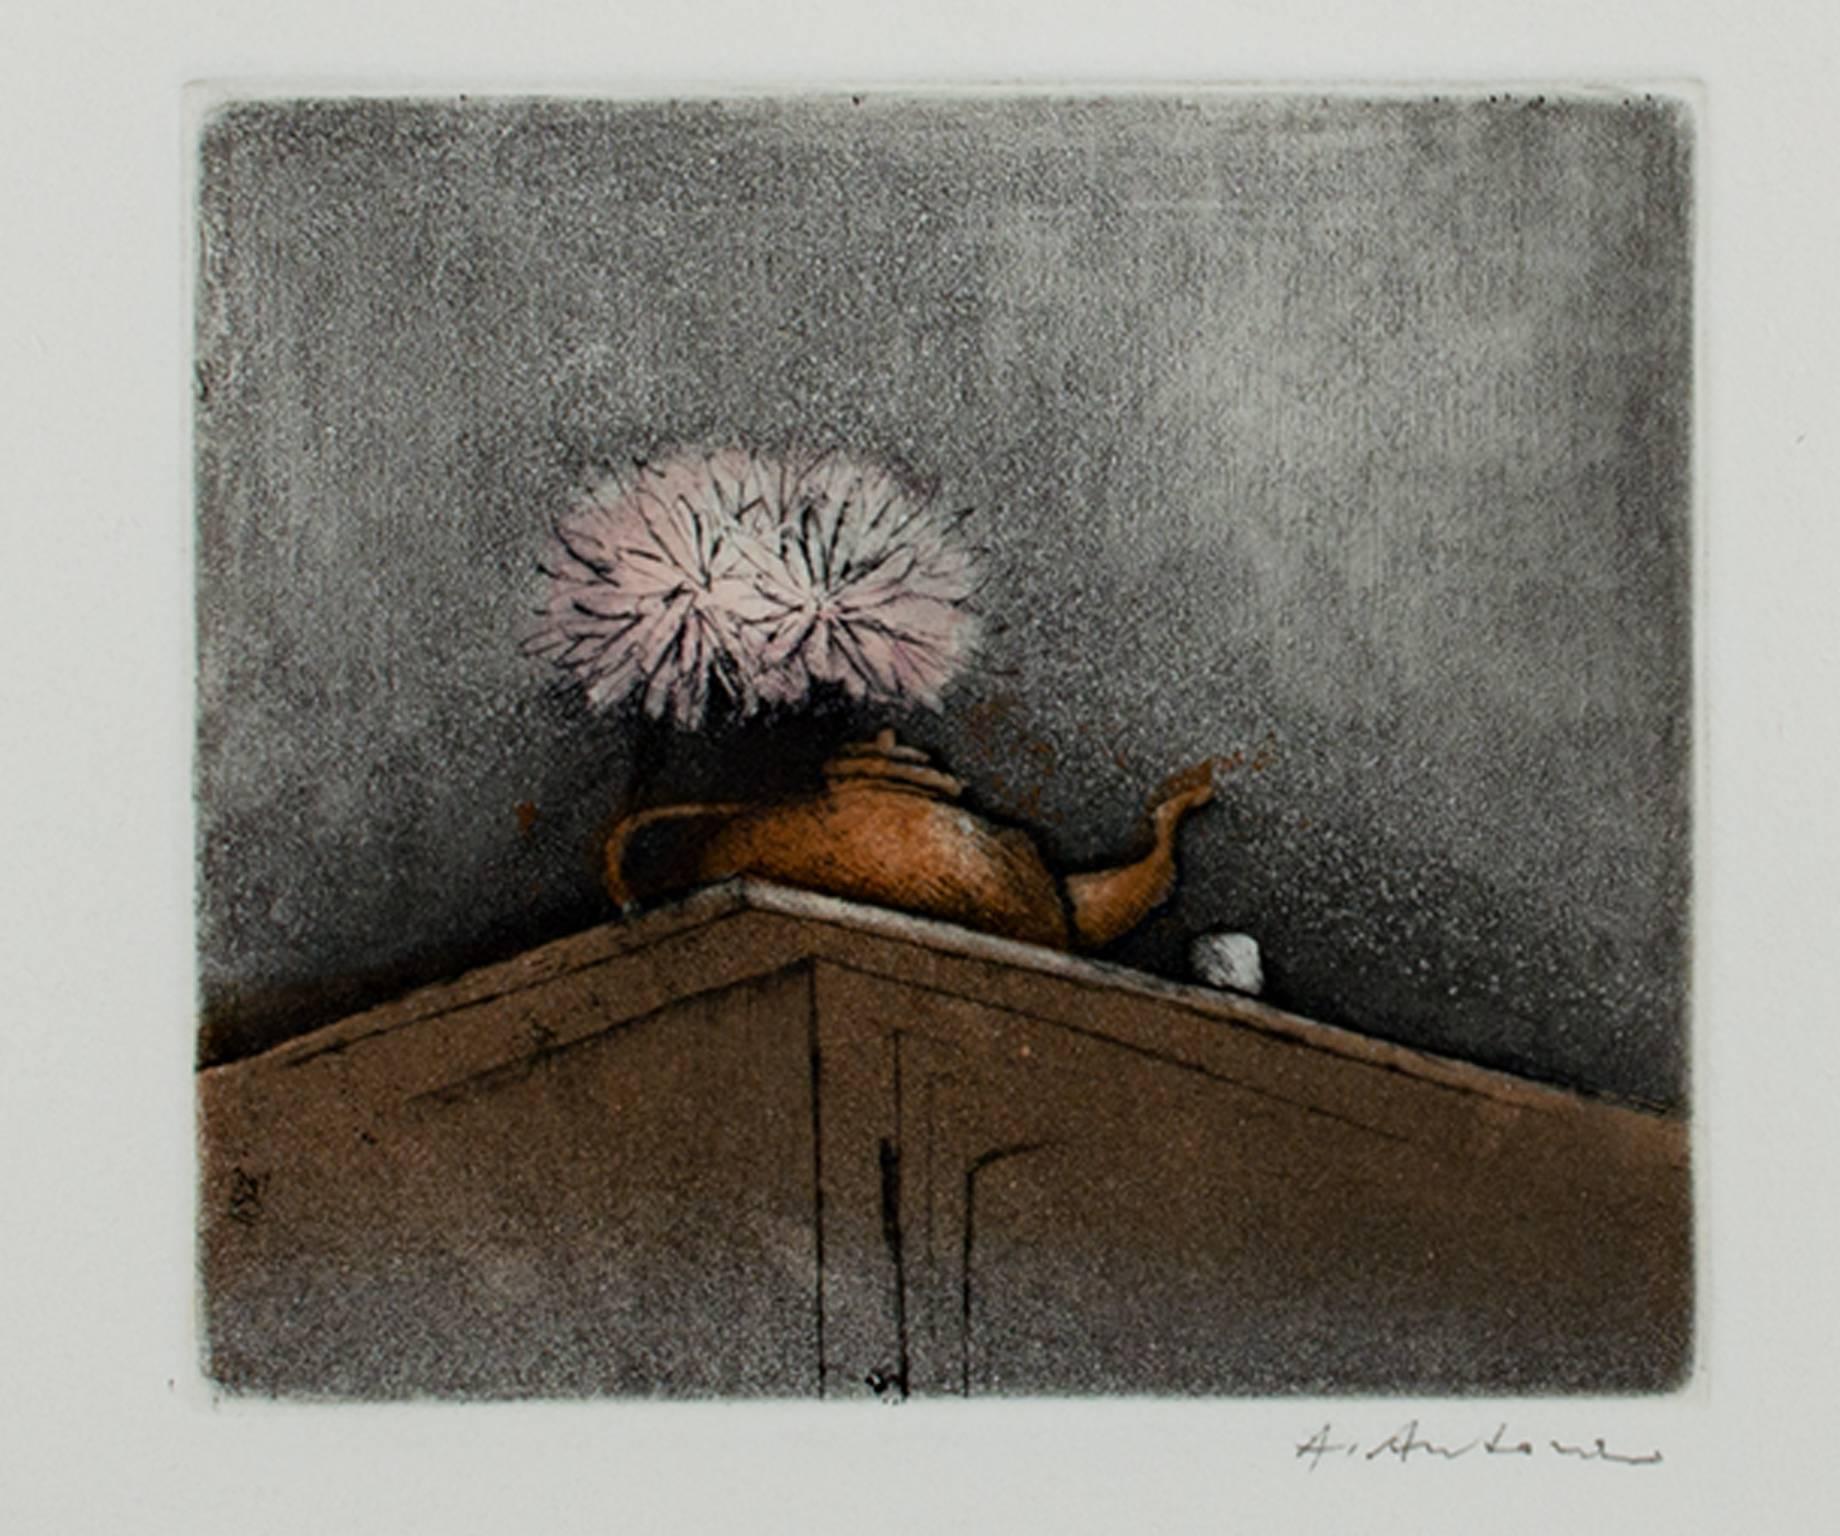 Unknown Still-Life Print - "Still Life with Teapot, New Year's Edition, " Original Aquatint by A. Antonni